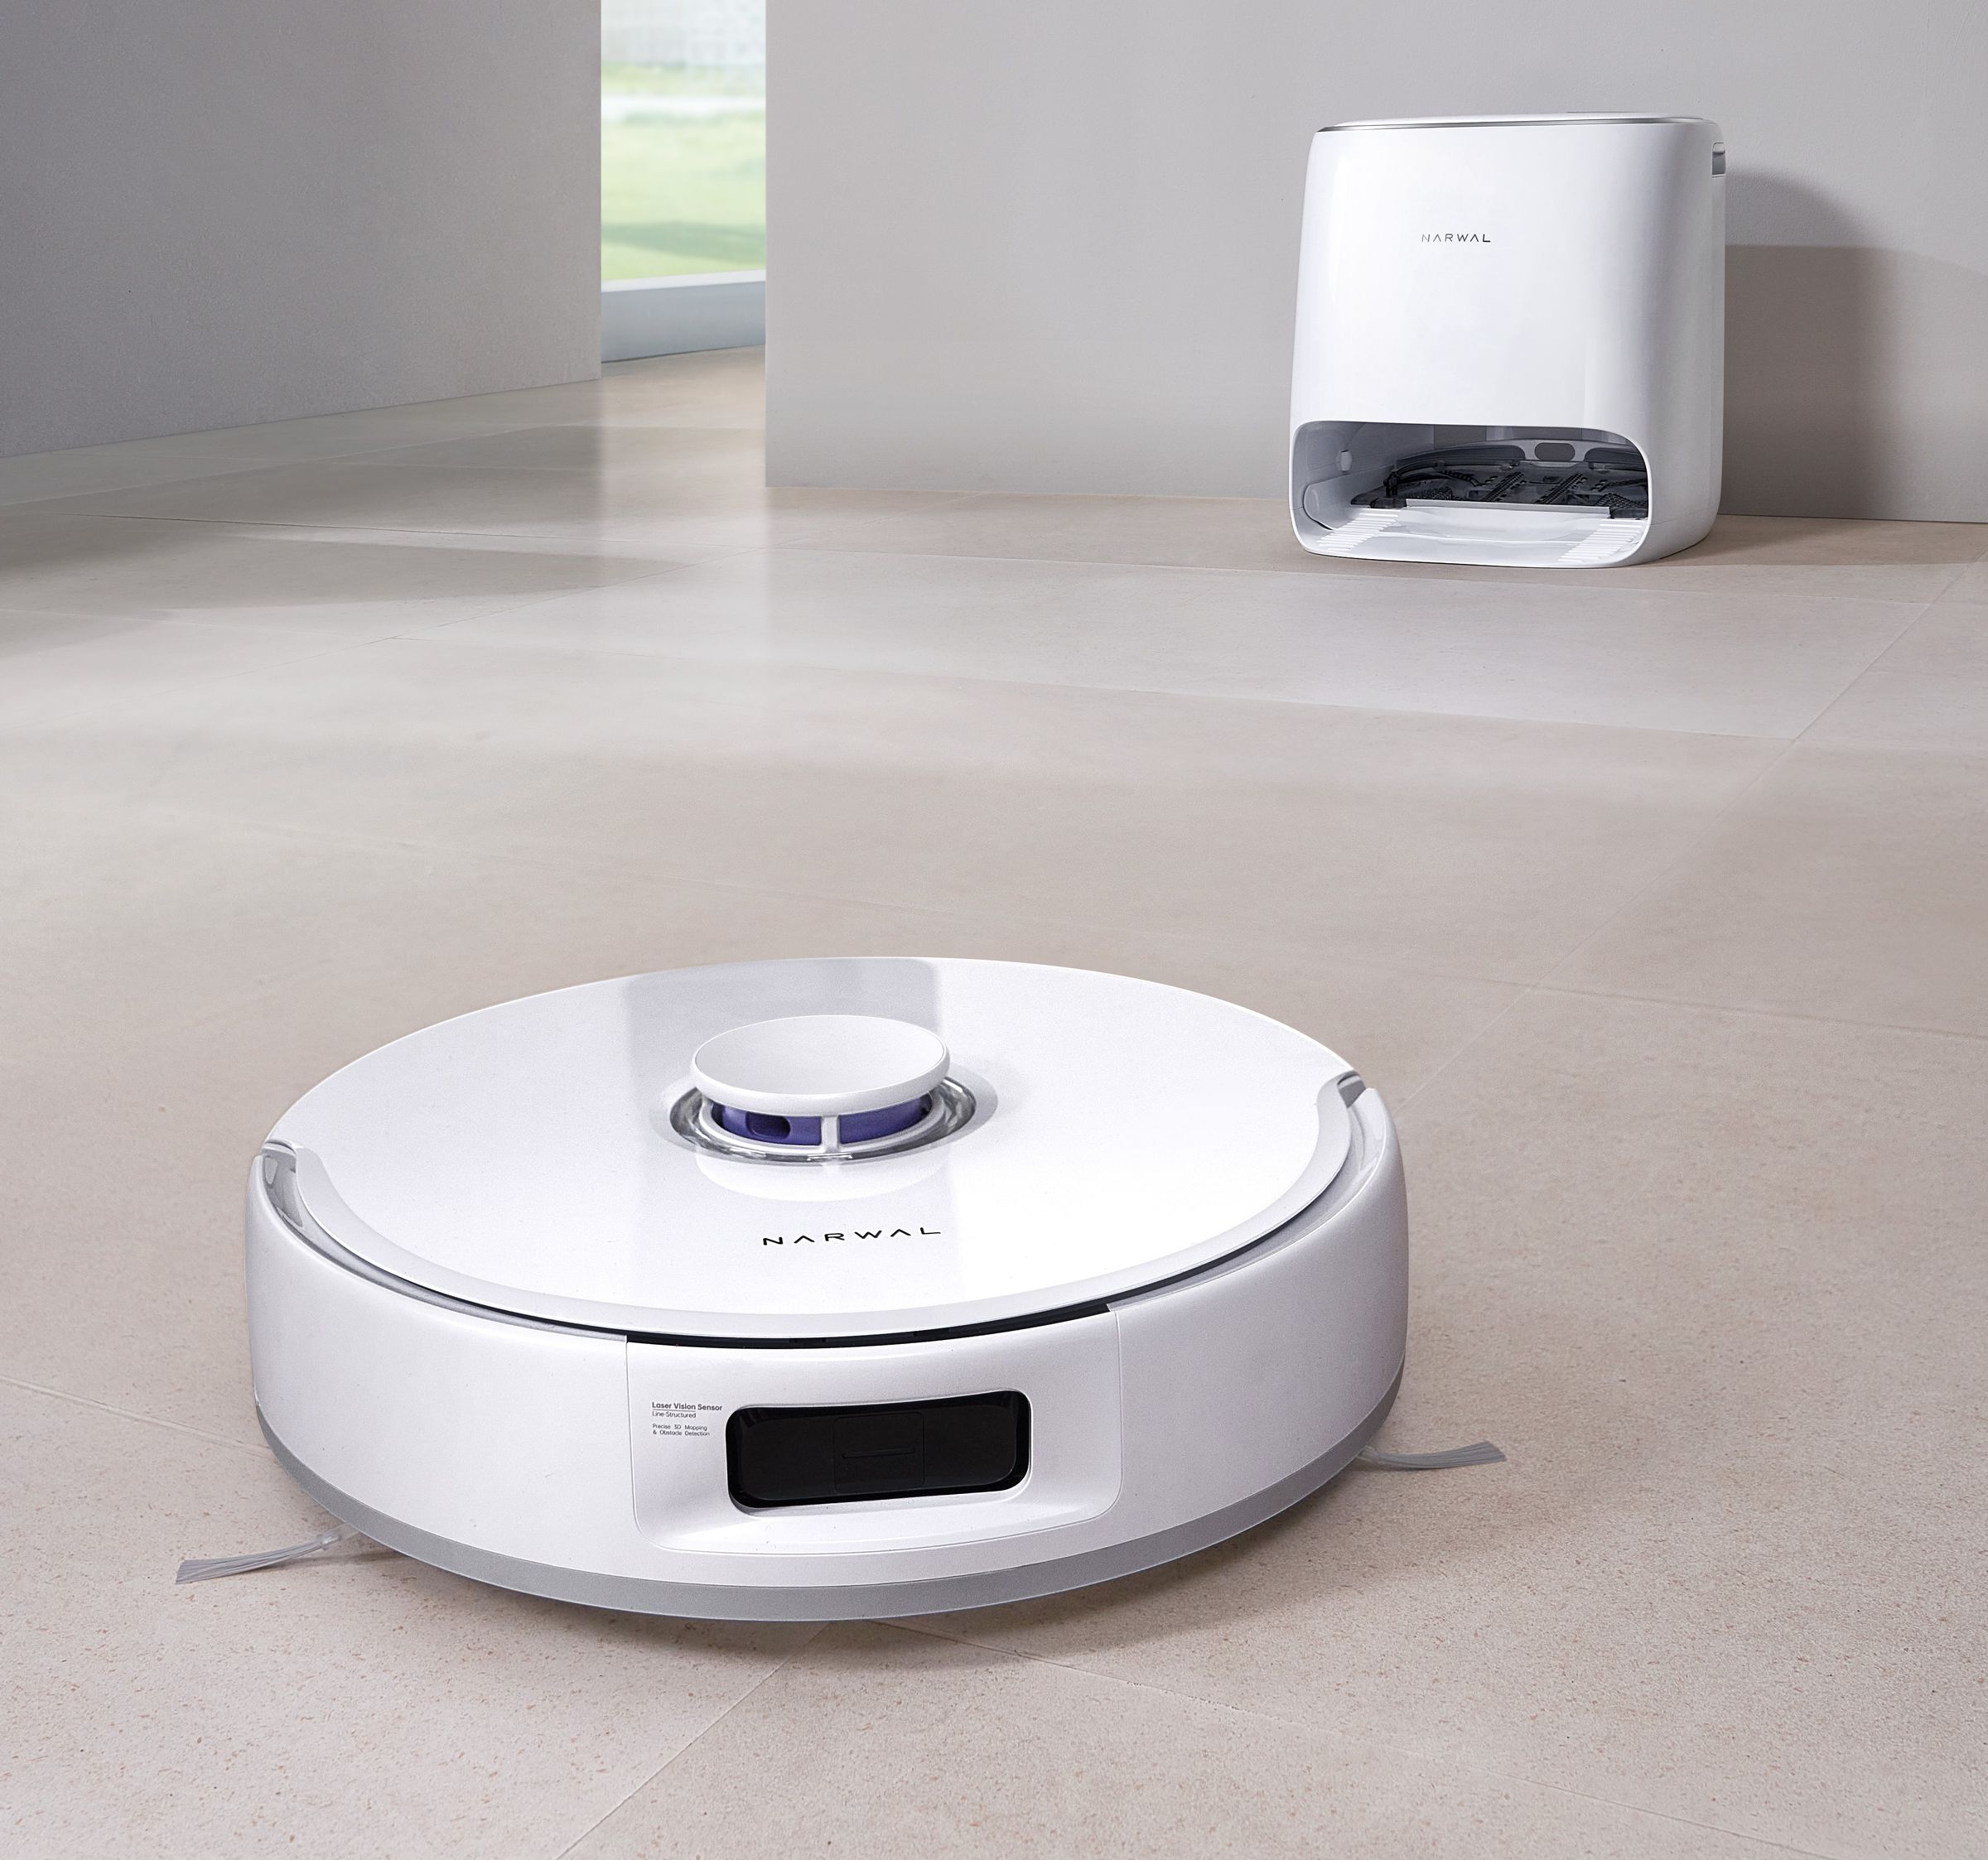 The new Narwal Freo X Ultra robovac, with its base station seen in the background.